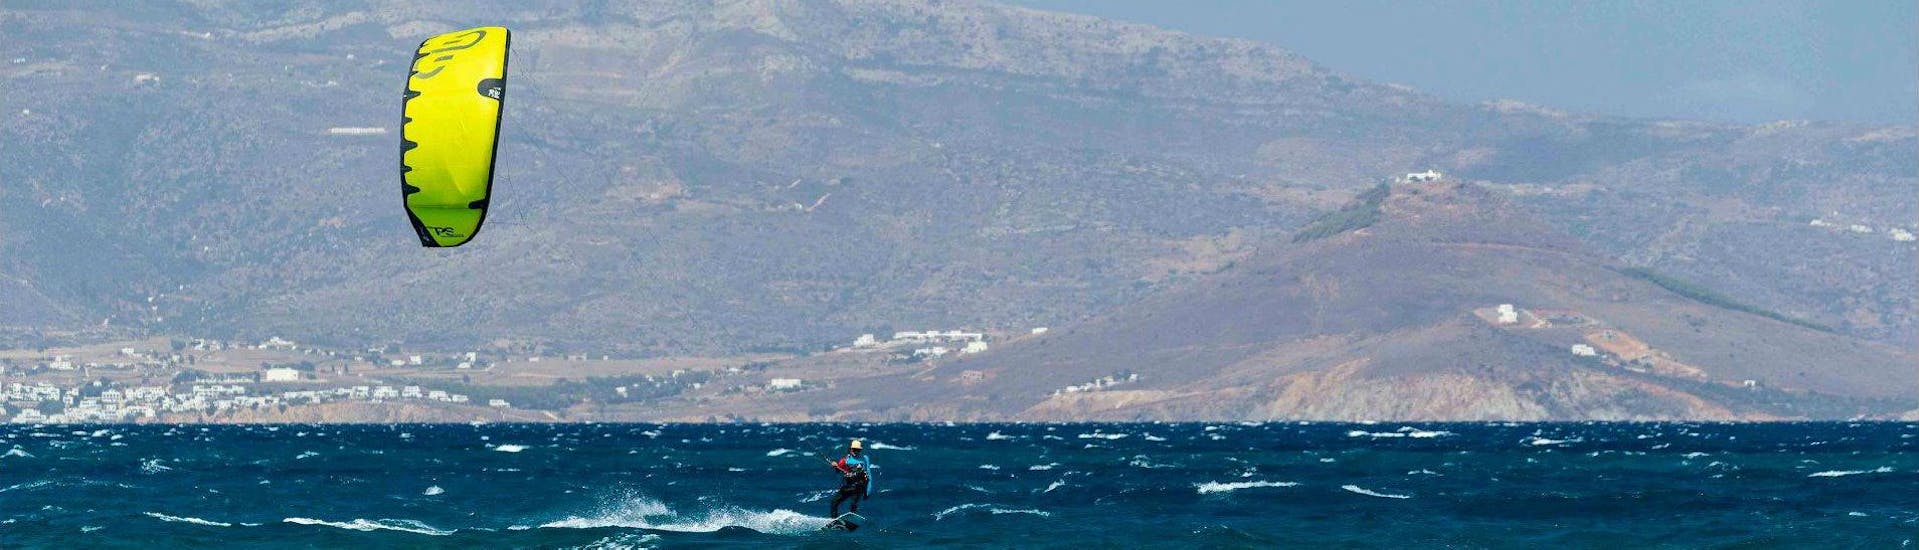 Private Kitesurfing Lessons for Teens &amp; Adults - All Levels with Naxos Kitelife - Hero image